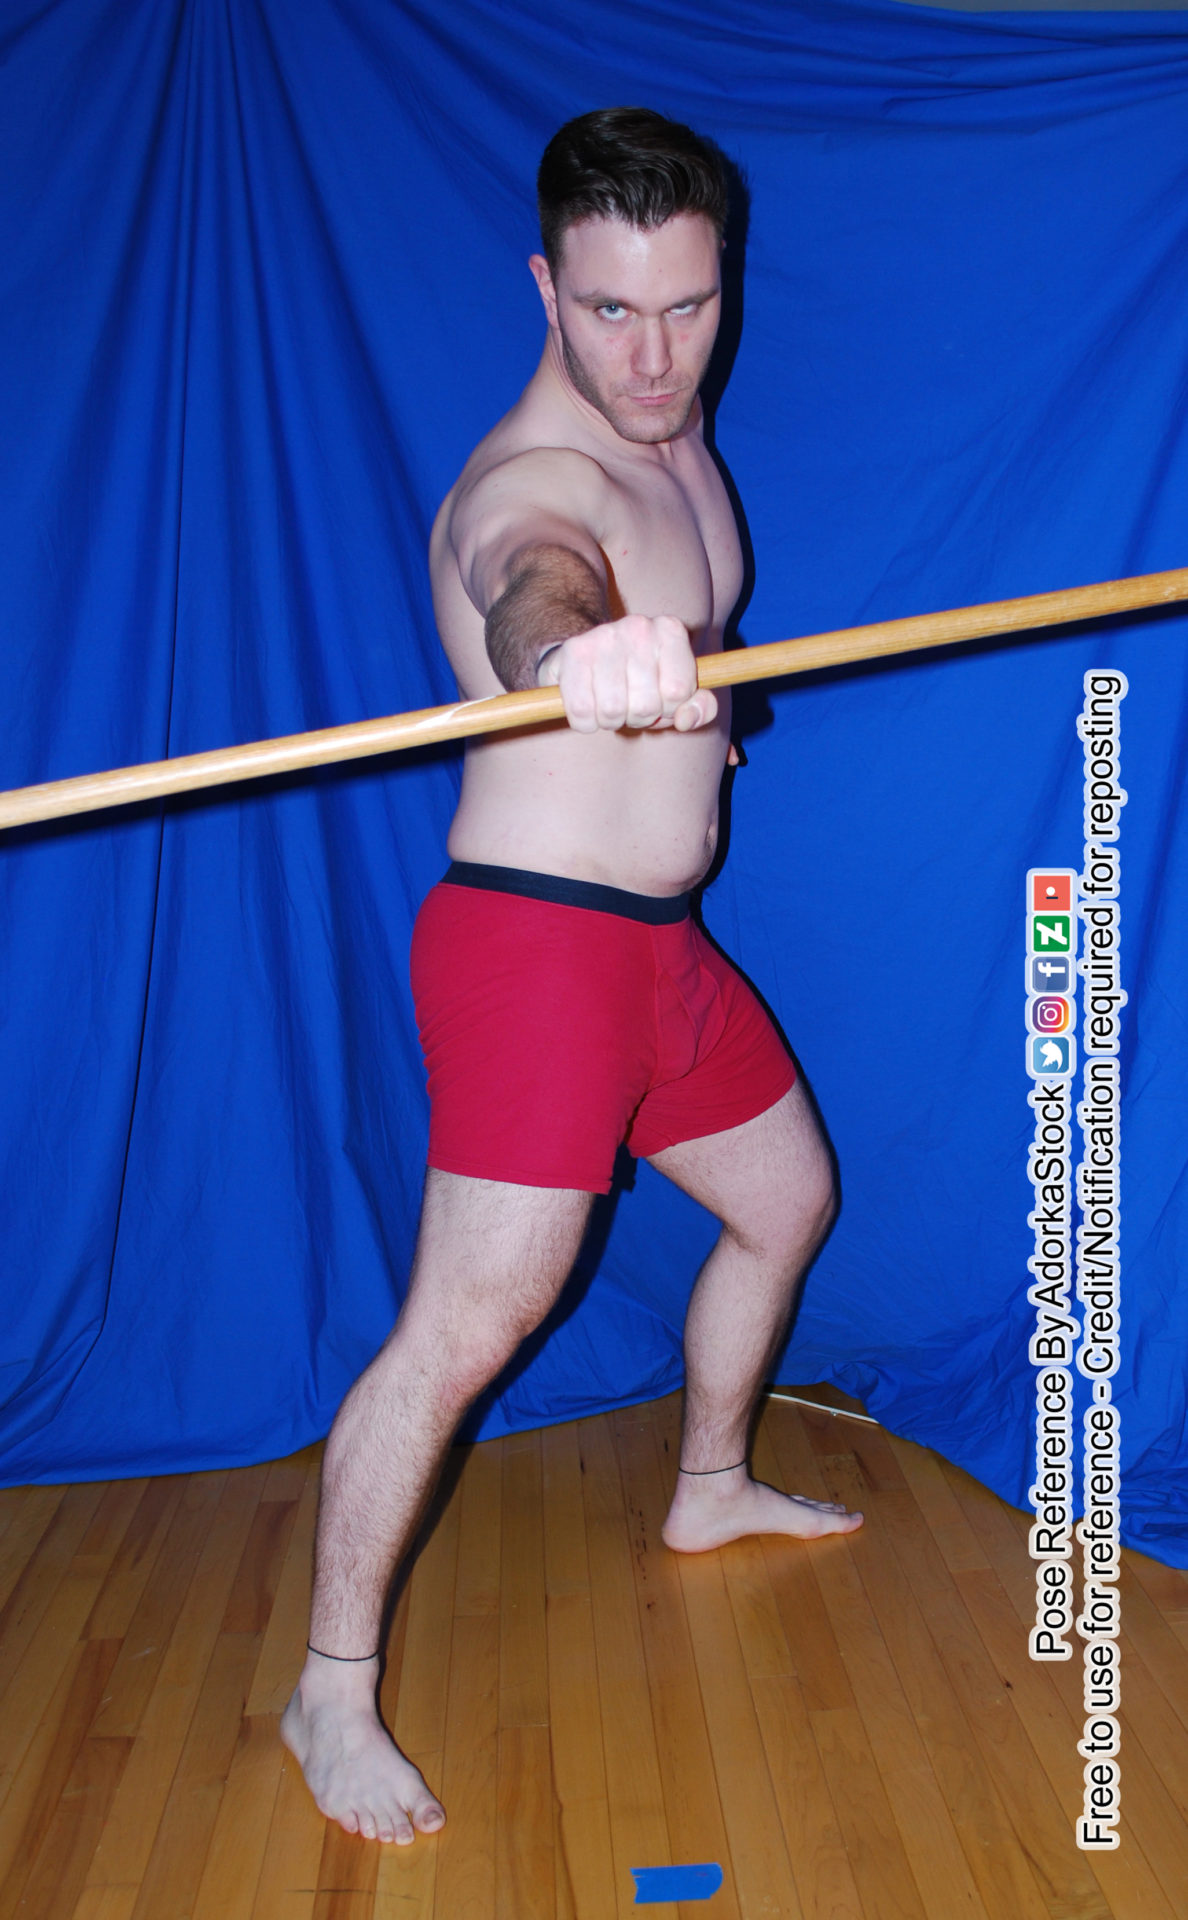 Fit, male pose reference model with one hands towards the camera holding a staff